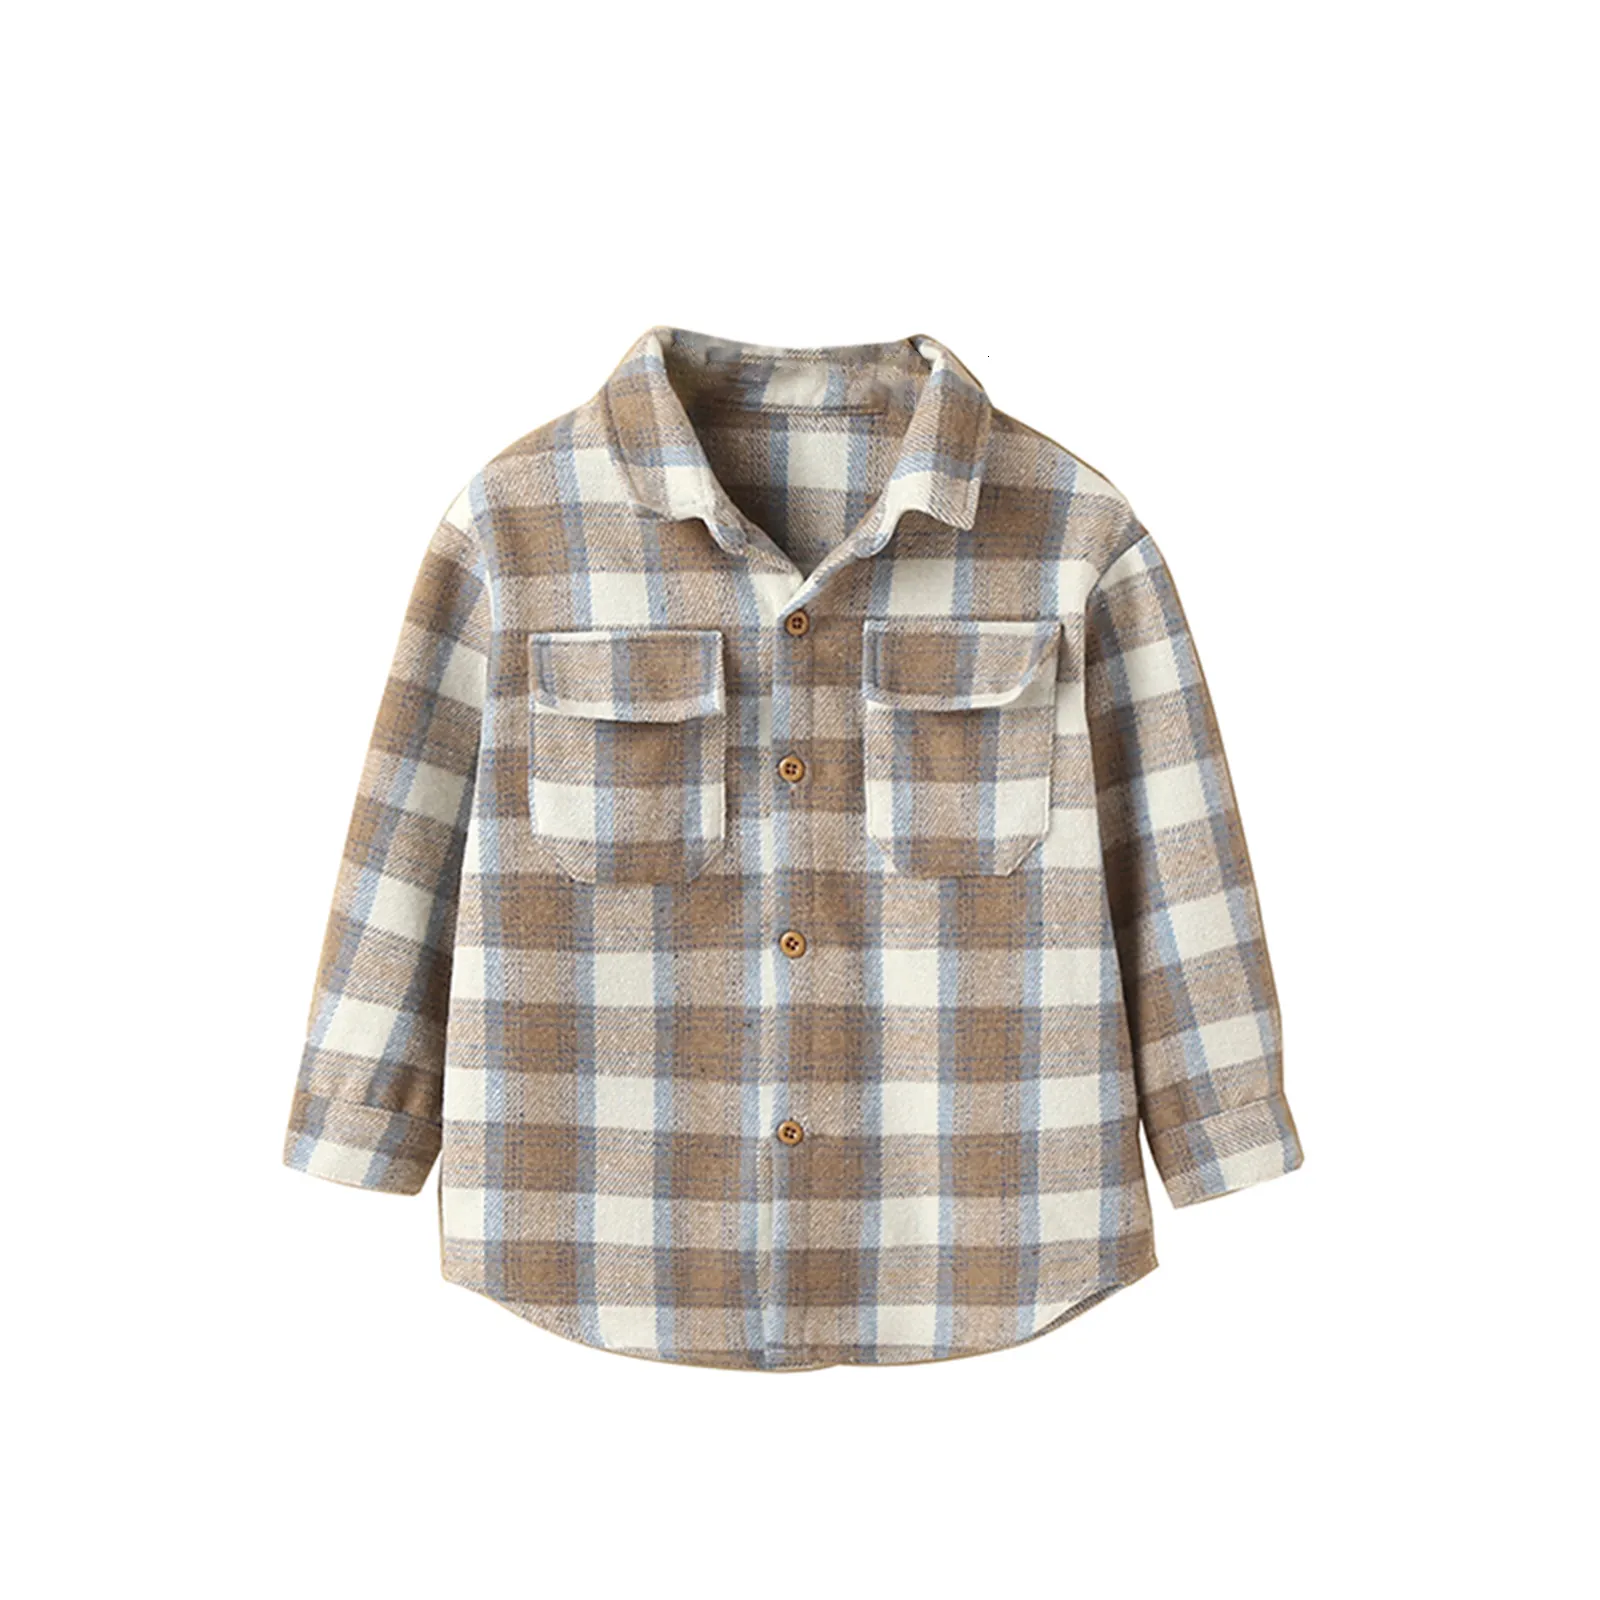 Kids Shirts Infant Kids Baby Girls Boys Casual Lapel Shirt Long Sleeves Check Pattern Single-breasted Tops Blouses Plaid Shirts 230531